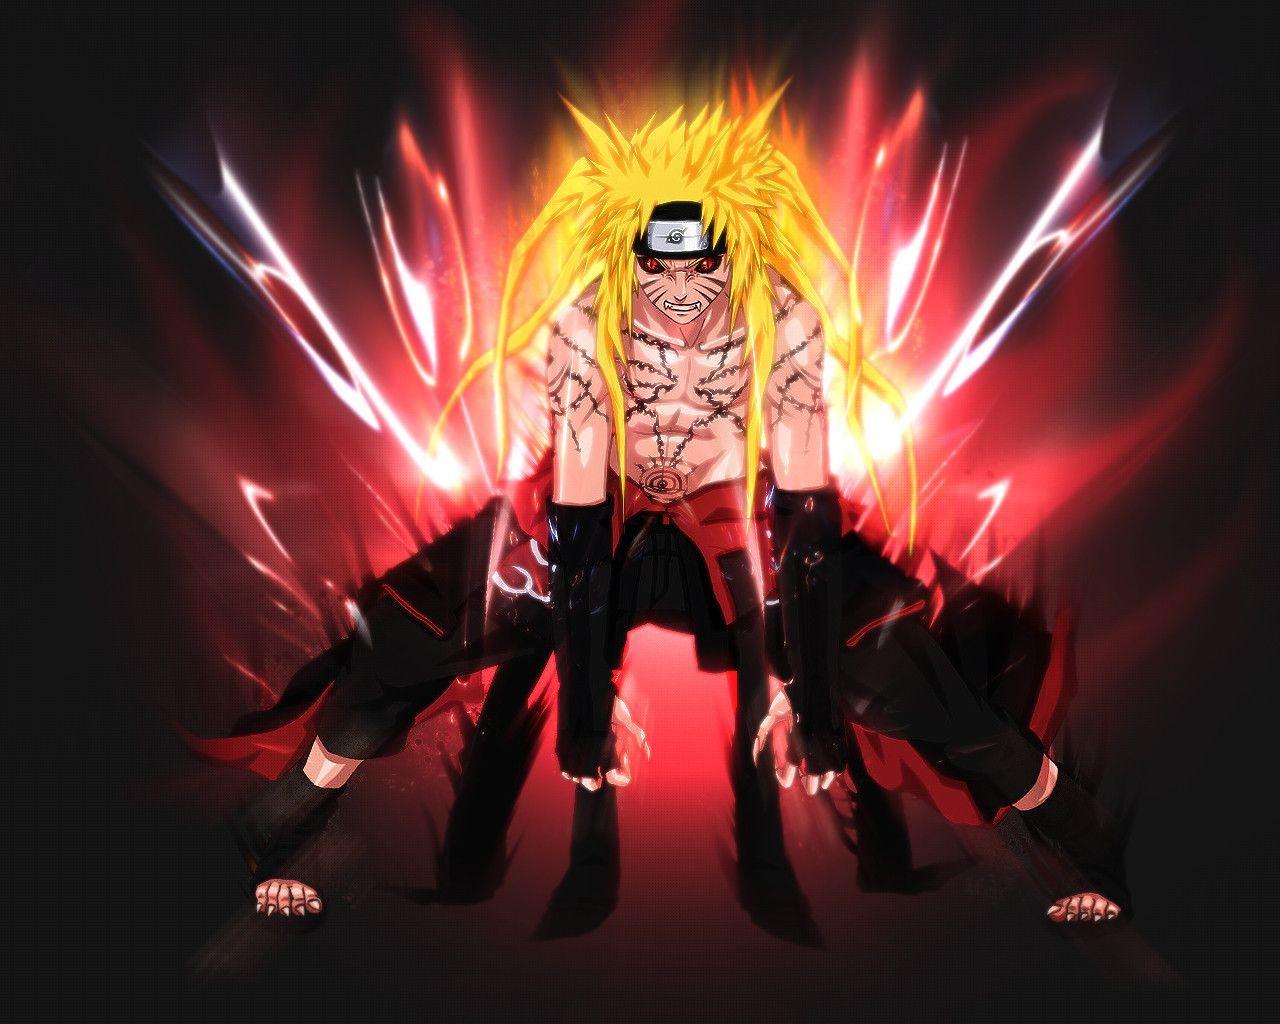 Naruto Pictures And Wallpapers - Wallpaper Cave